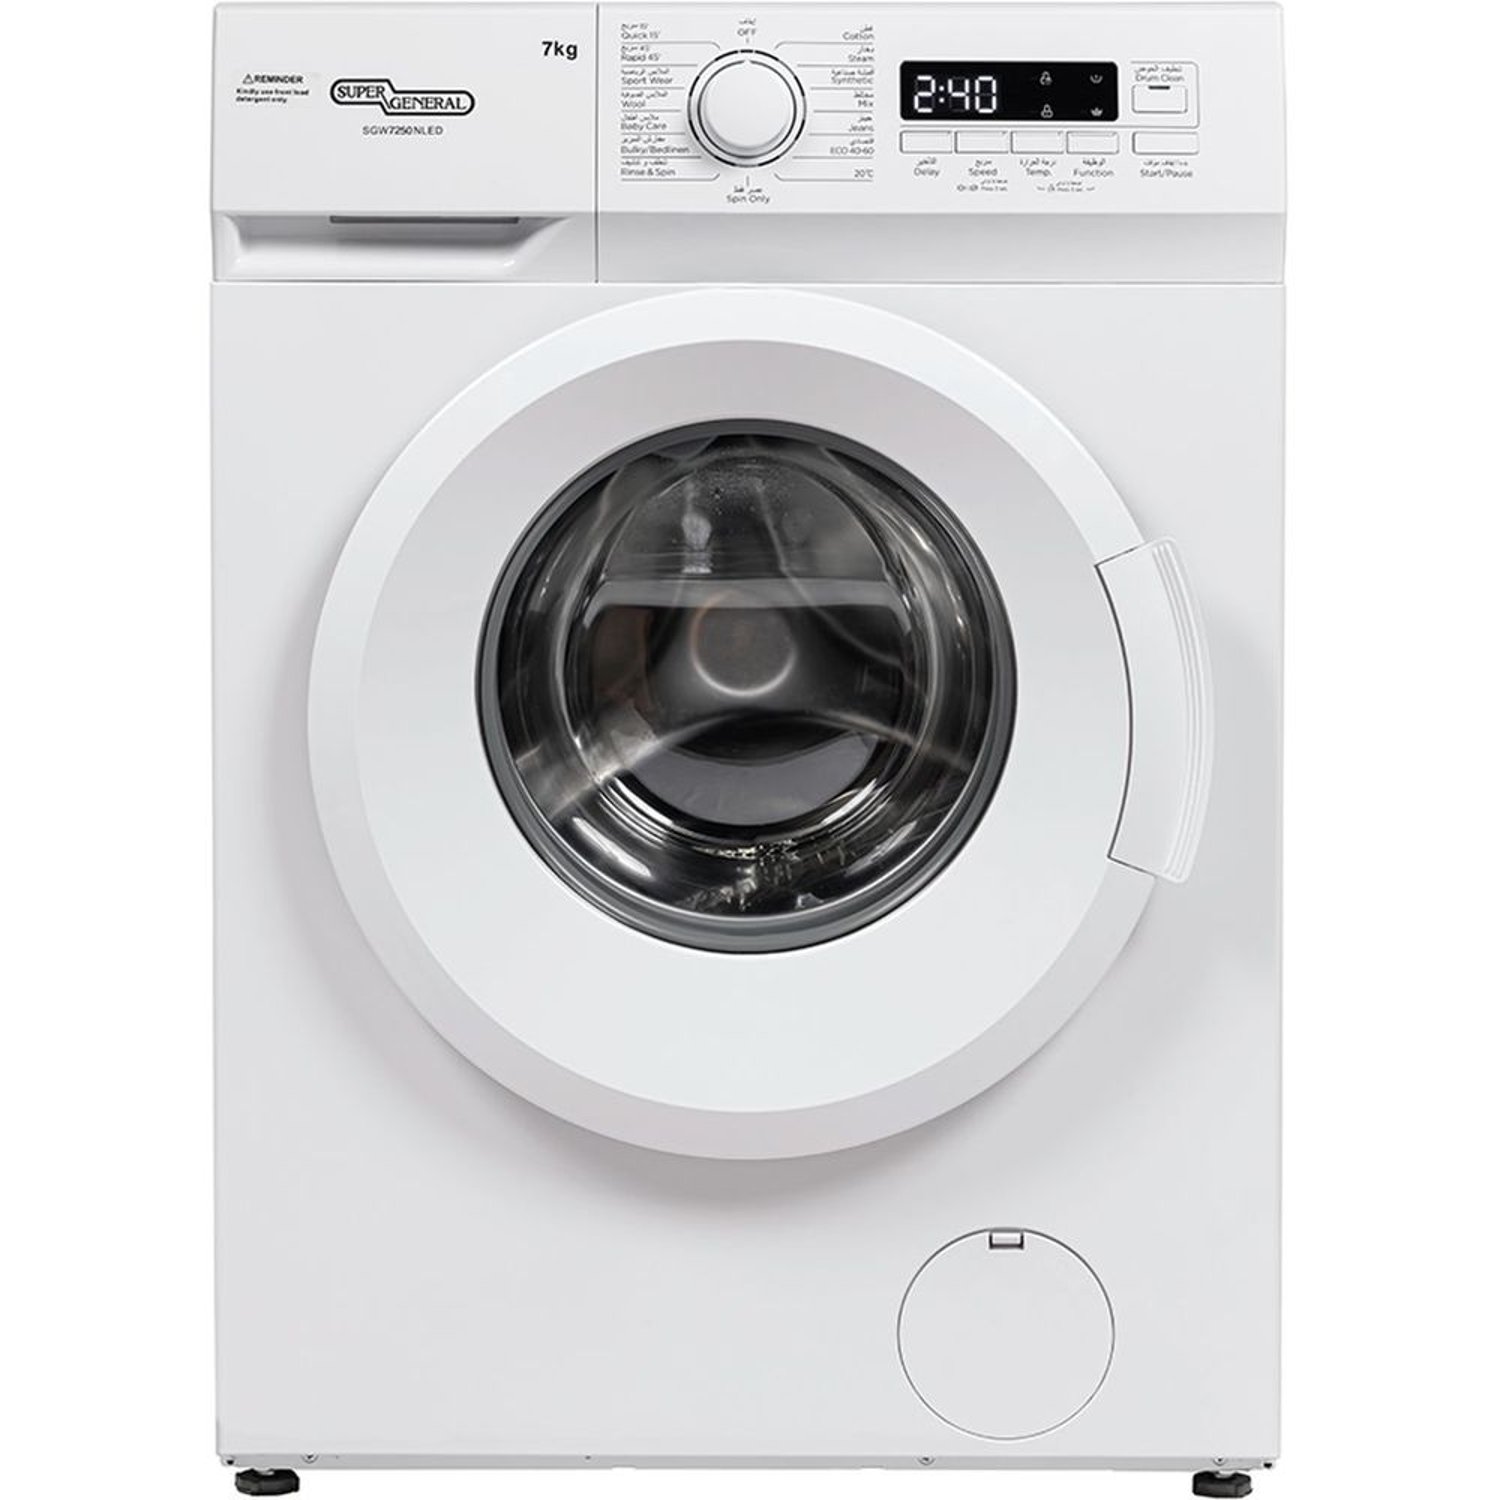 Super General 7 Kg Front Load Washing Machine 1200 RPM Color White Model – SGW7250NLED – 1 Year Warranty.